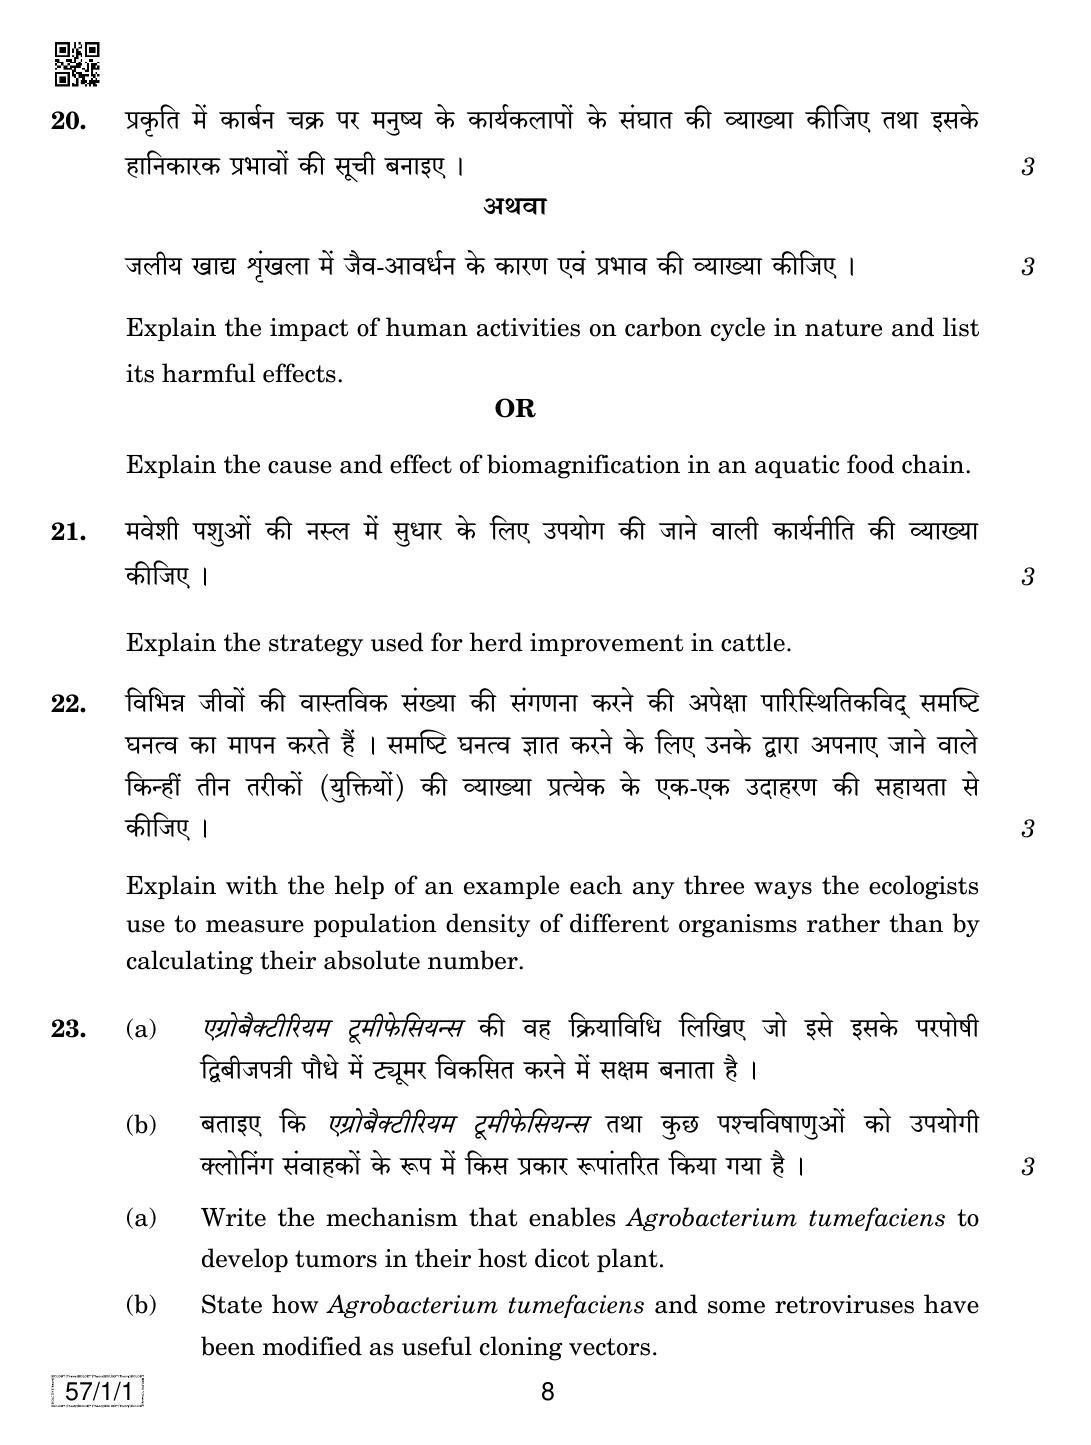 CBSE Class 12 57-1-1 BIOLOGY 2019 Compartment Question Paper - Page 8